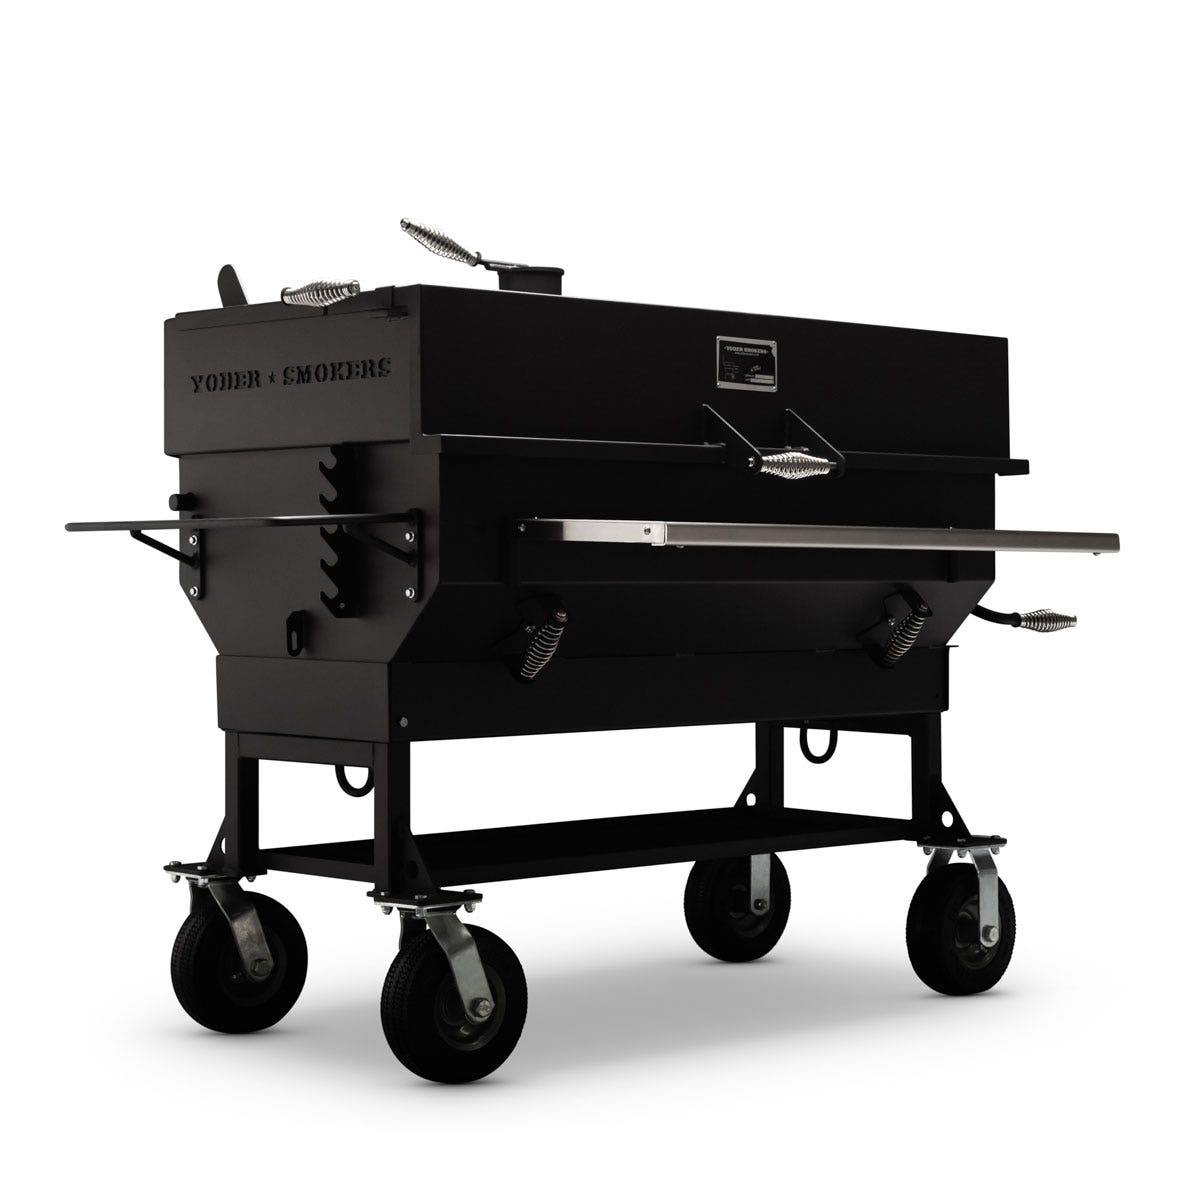 Yoder Smokers Adjustable Charcoal Grill Outdoor Grills